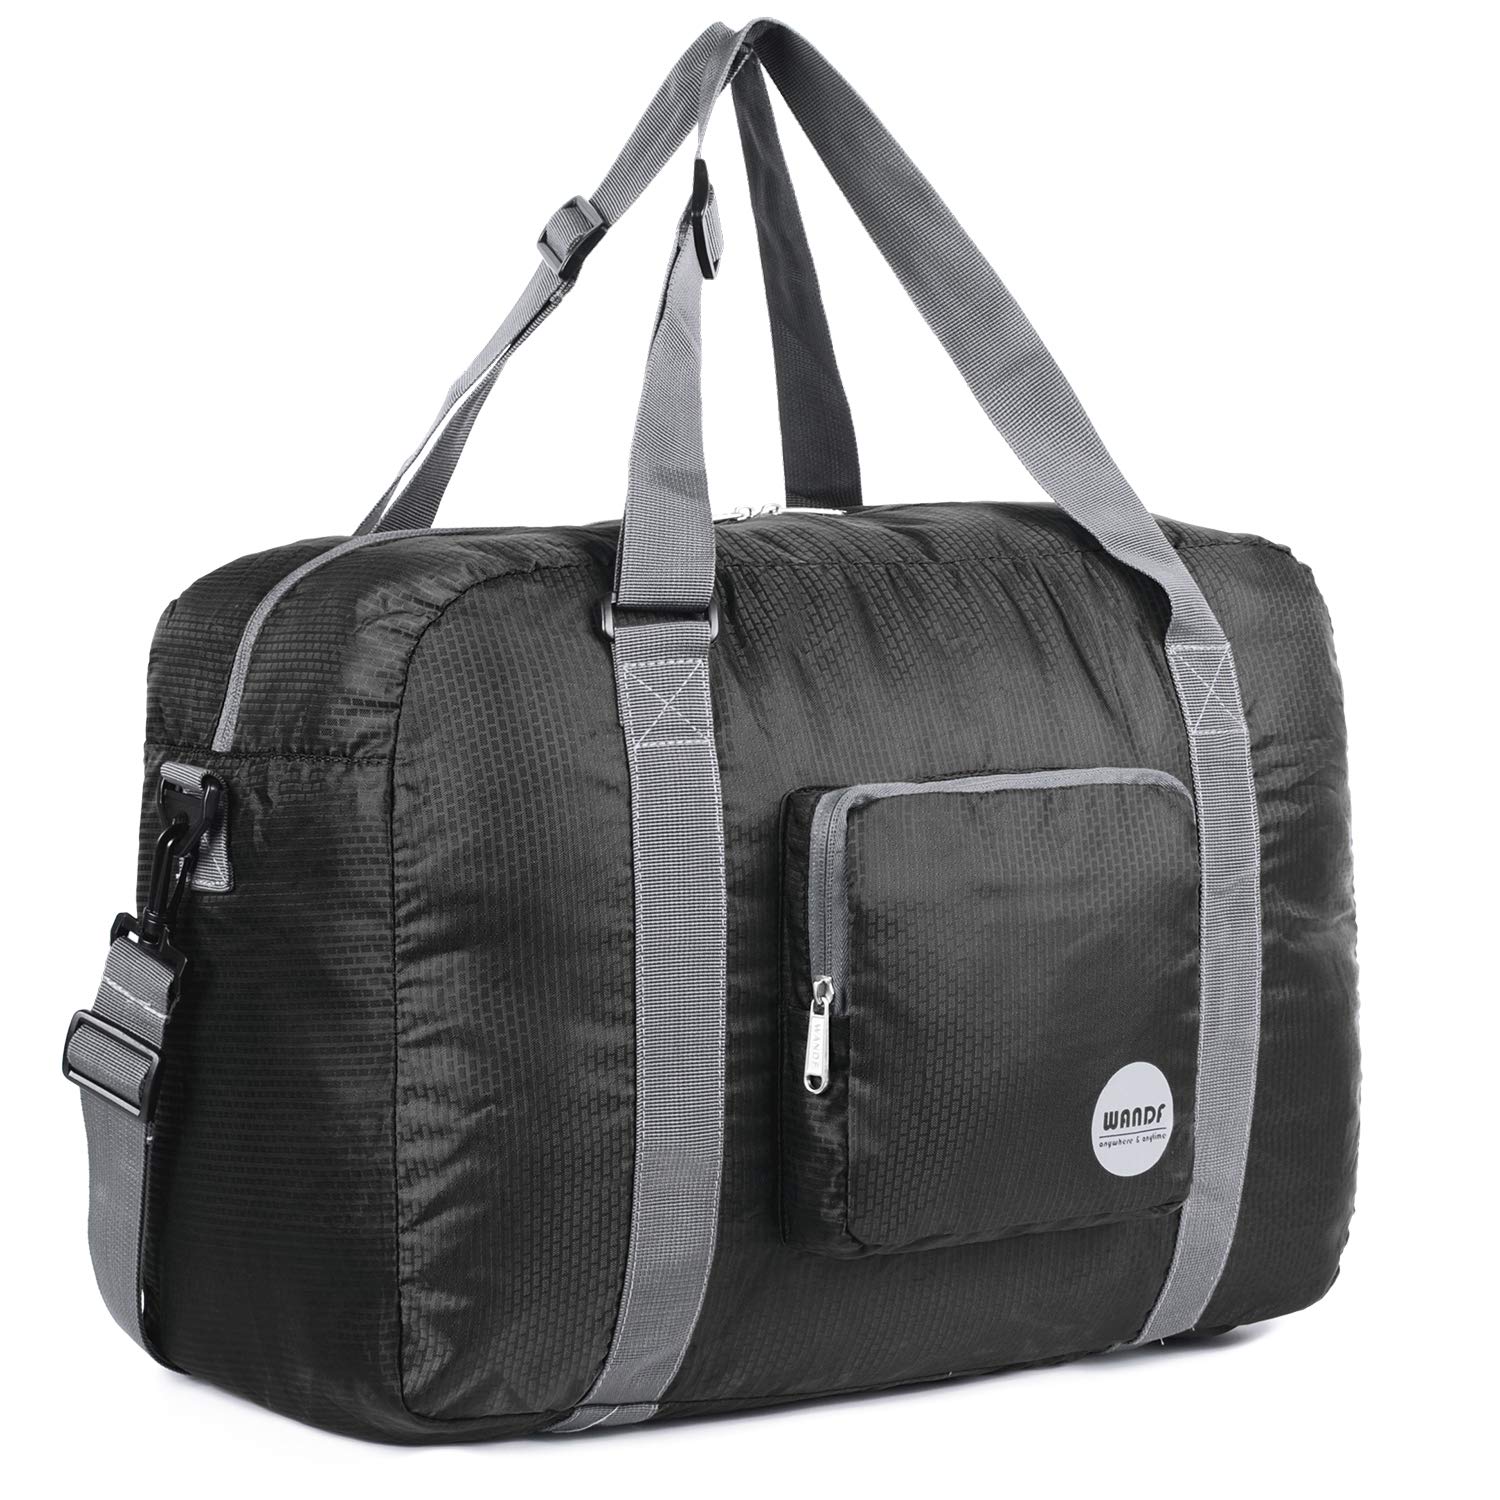 Troika Travel Pack Foldable Travel Bag in Three Colors | Troikaus.com